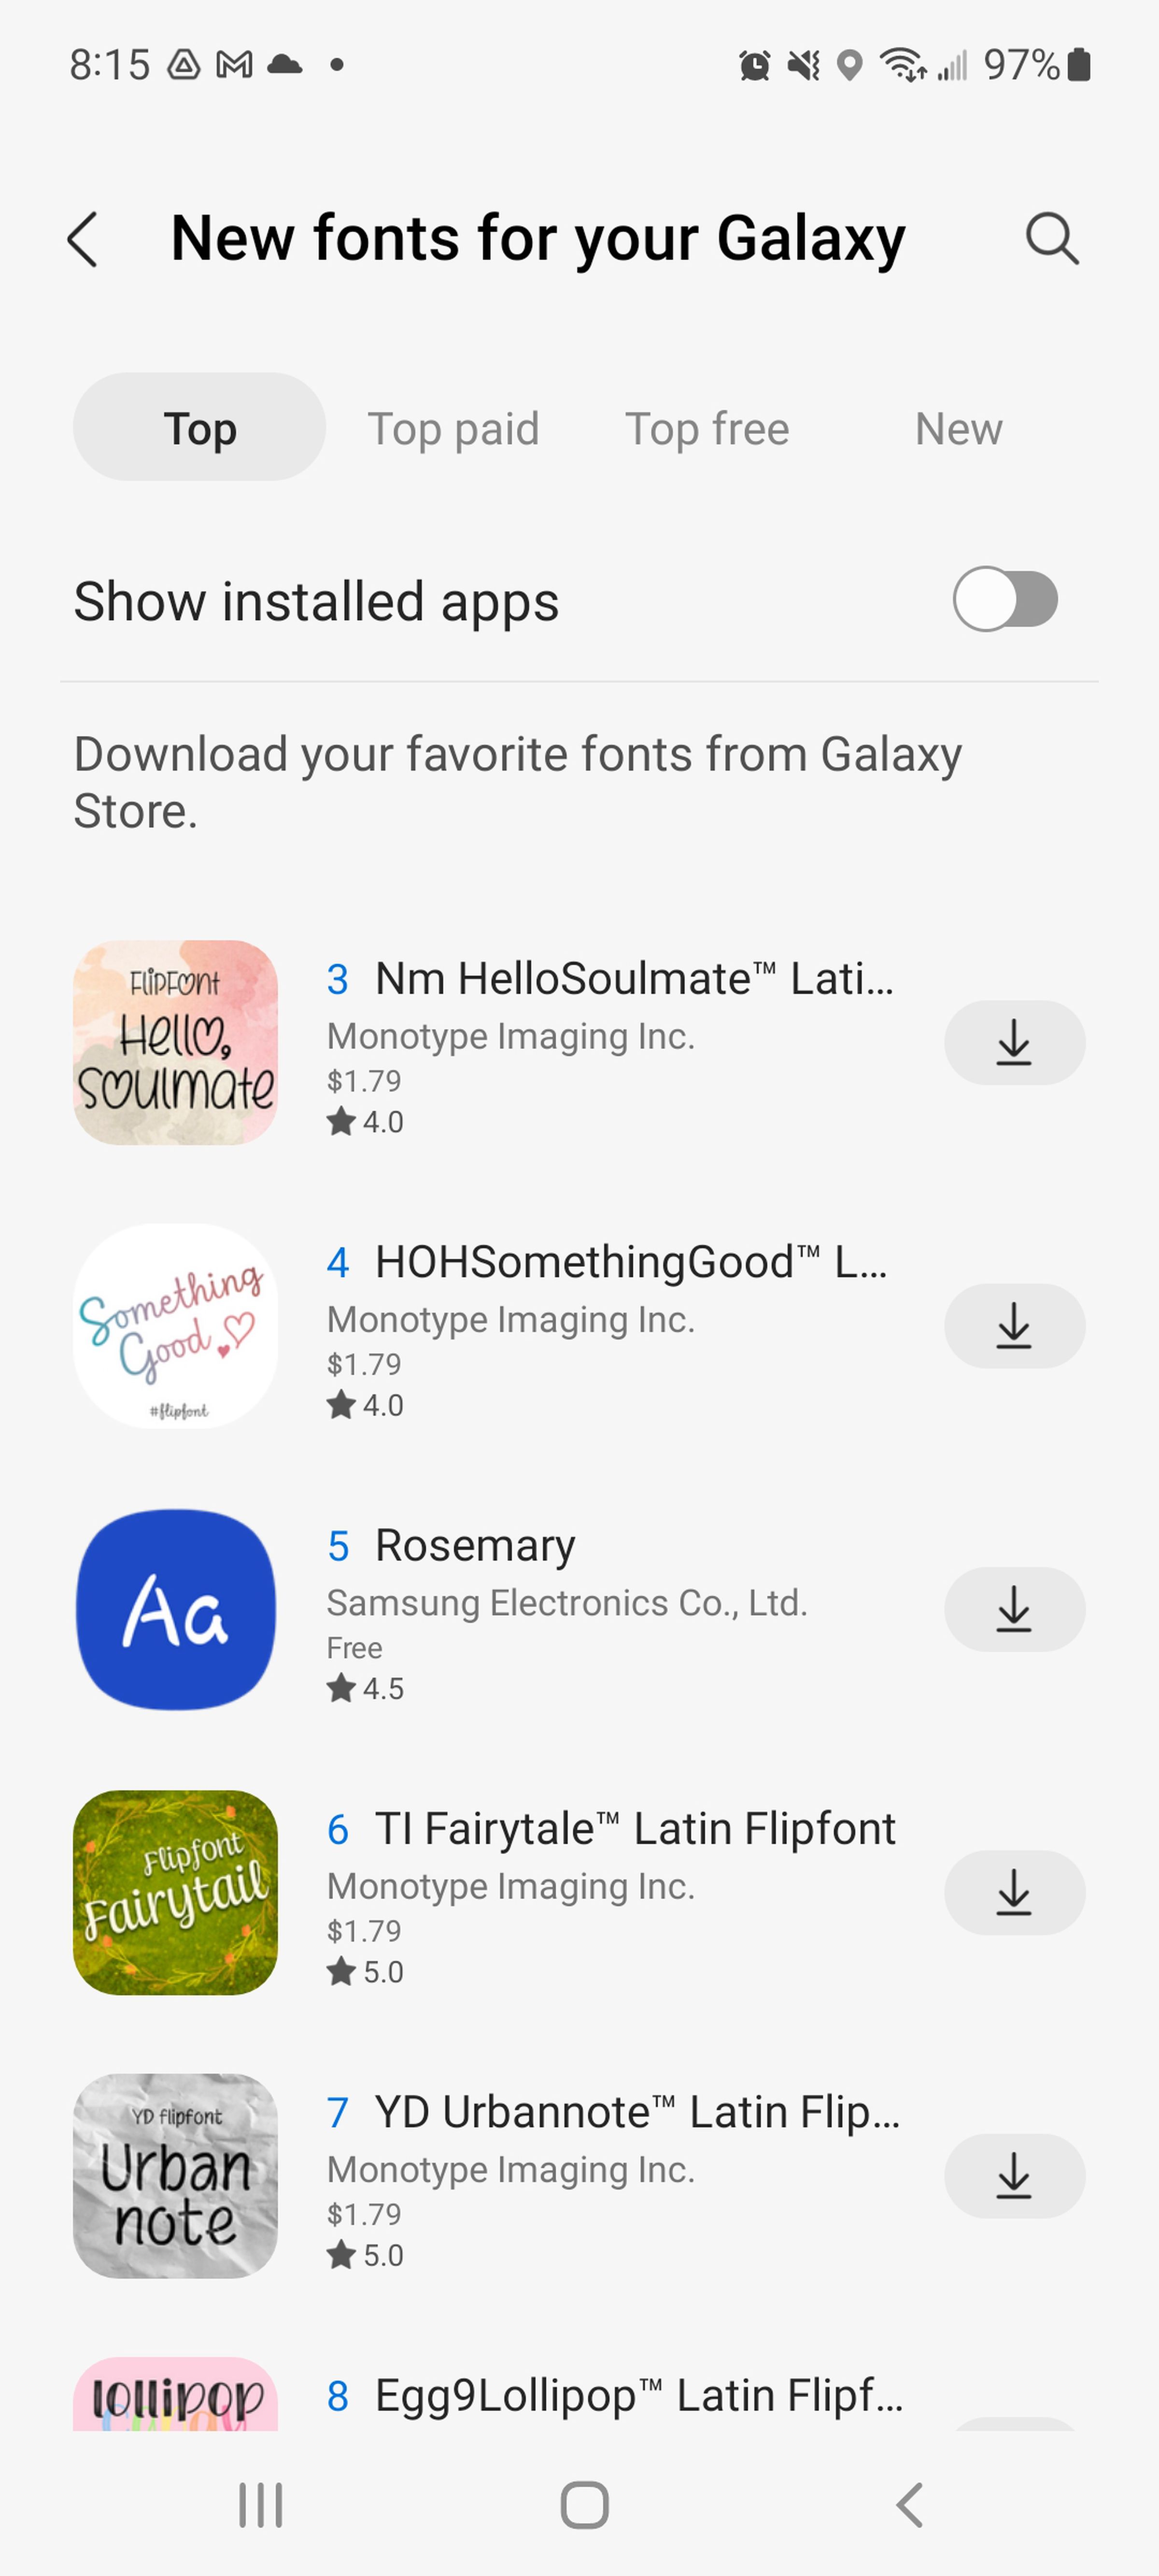 New fonts can be downloaded from the Galaxy Store. Some are free, but most cost about $2.